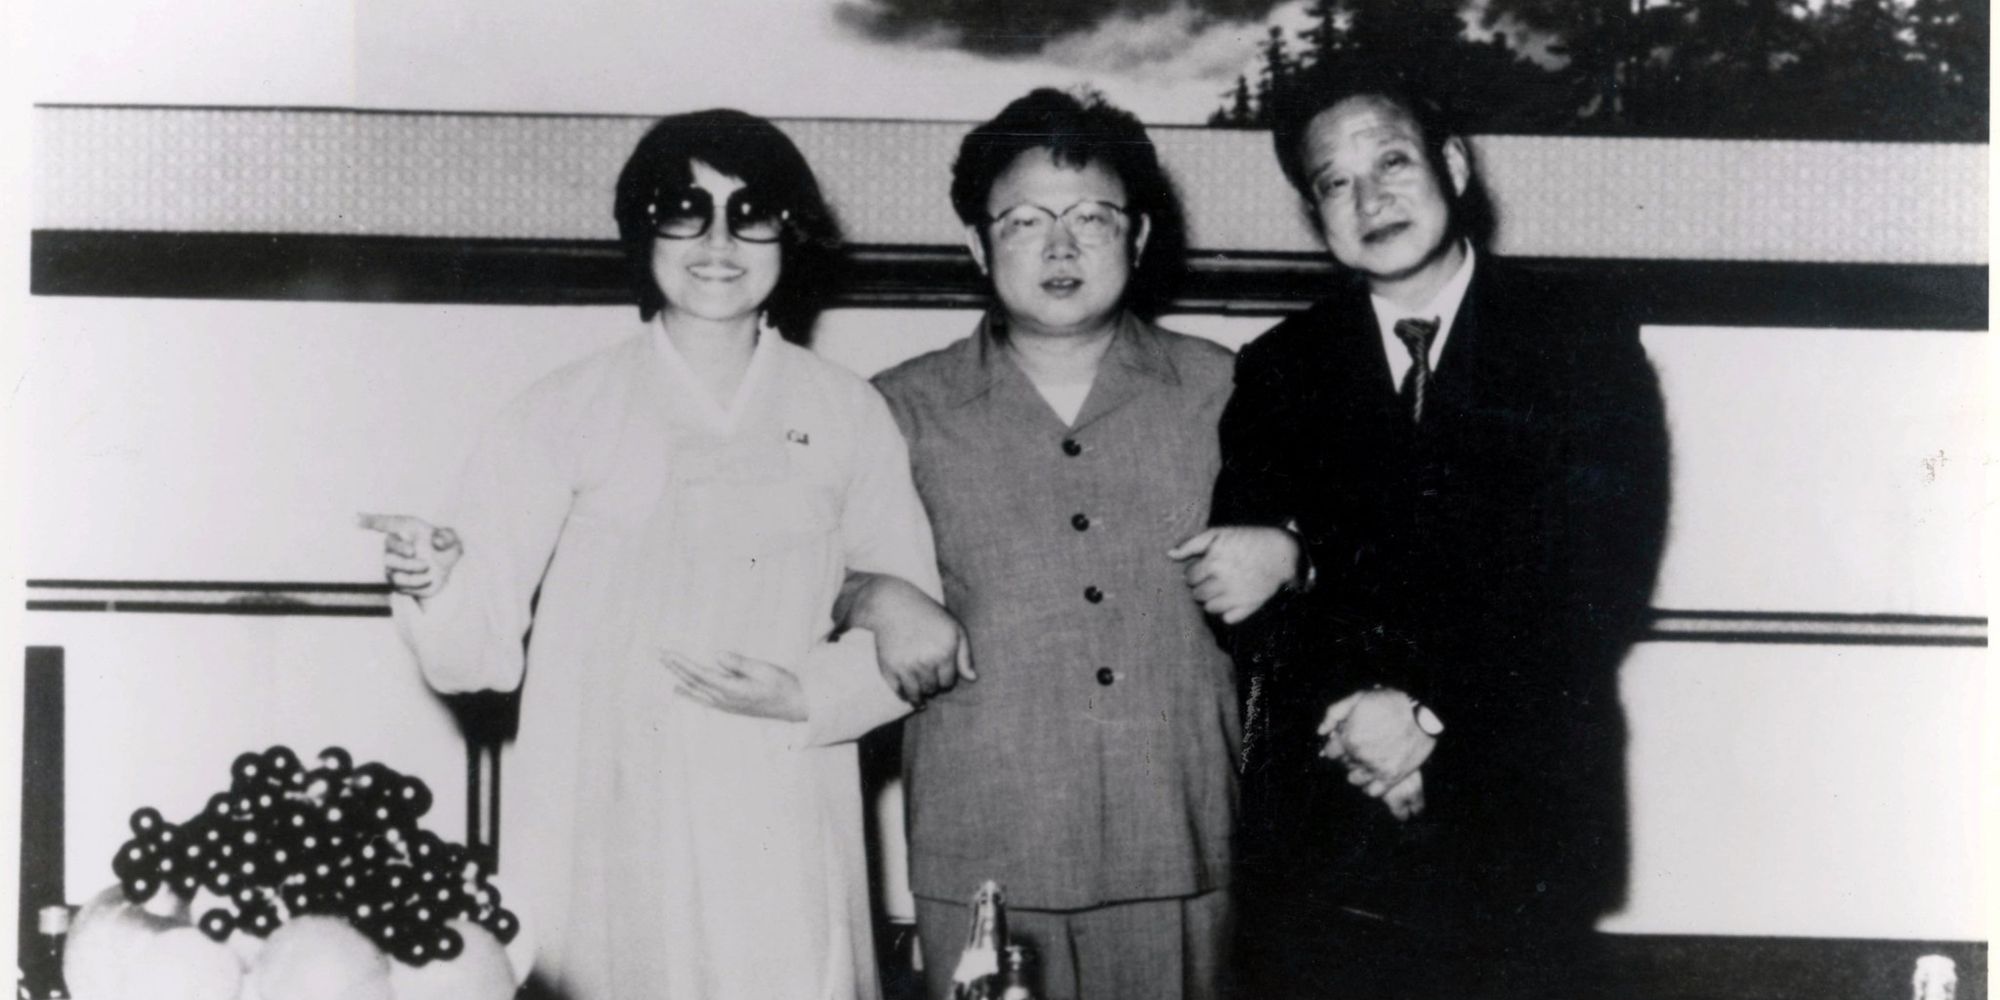 The famed South Korean entertainment couple, Choi Eun-hee And Shin Sang-ok with infamous dictator Kim Jon Il